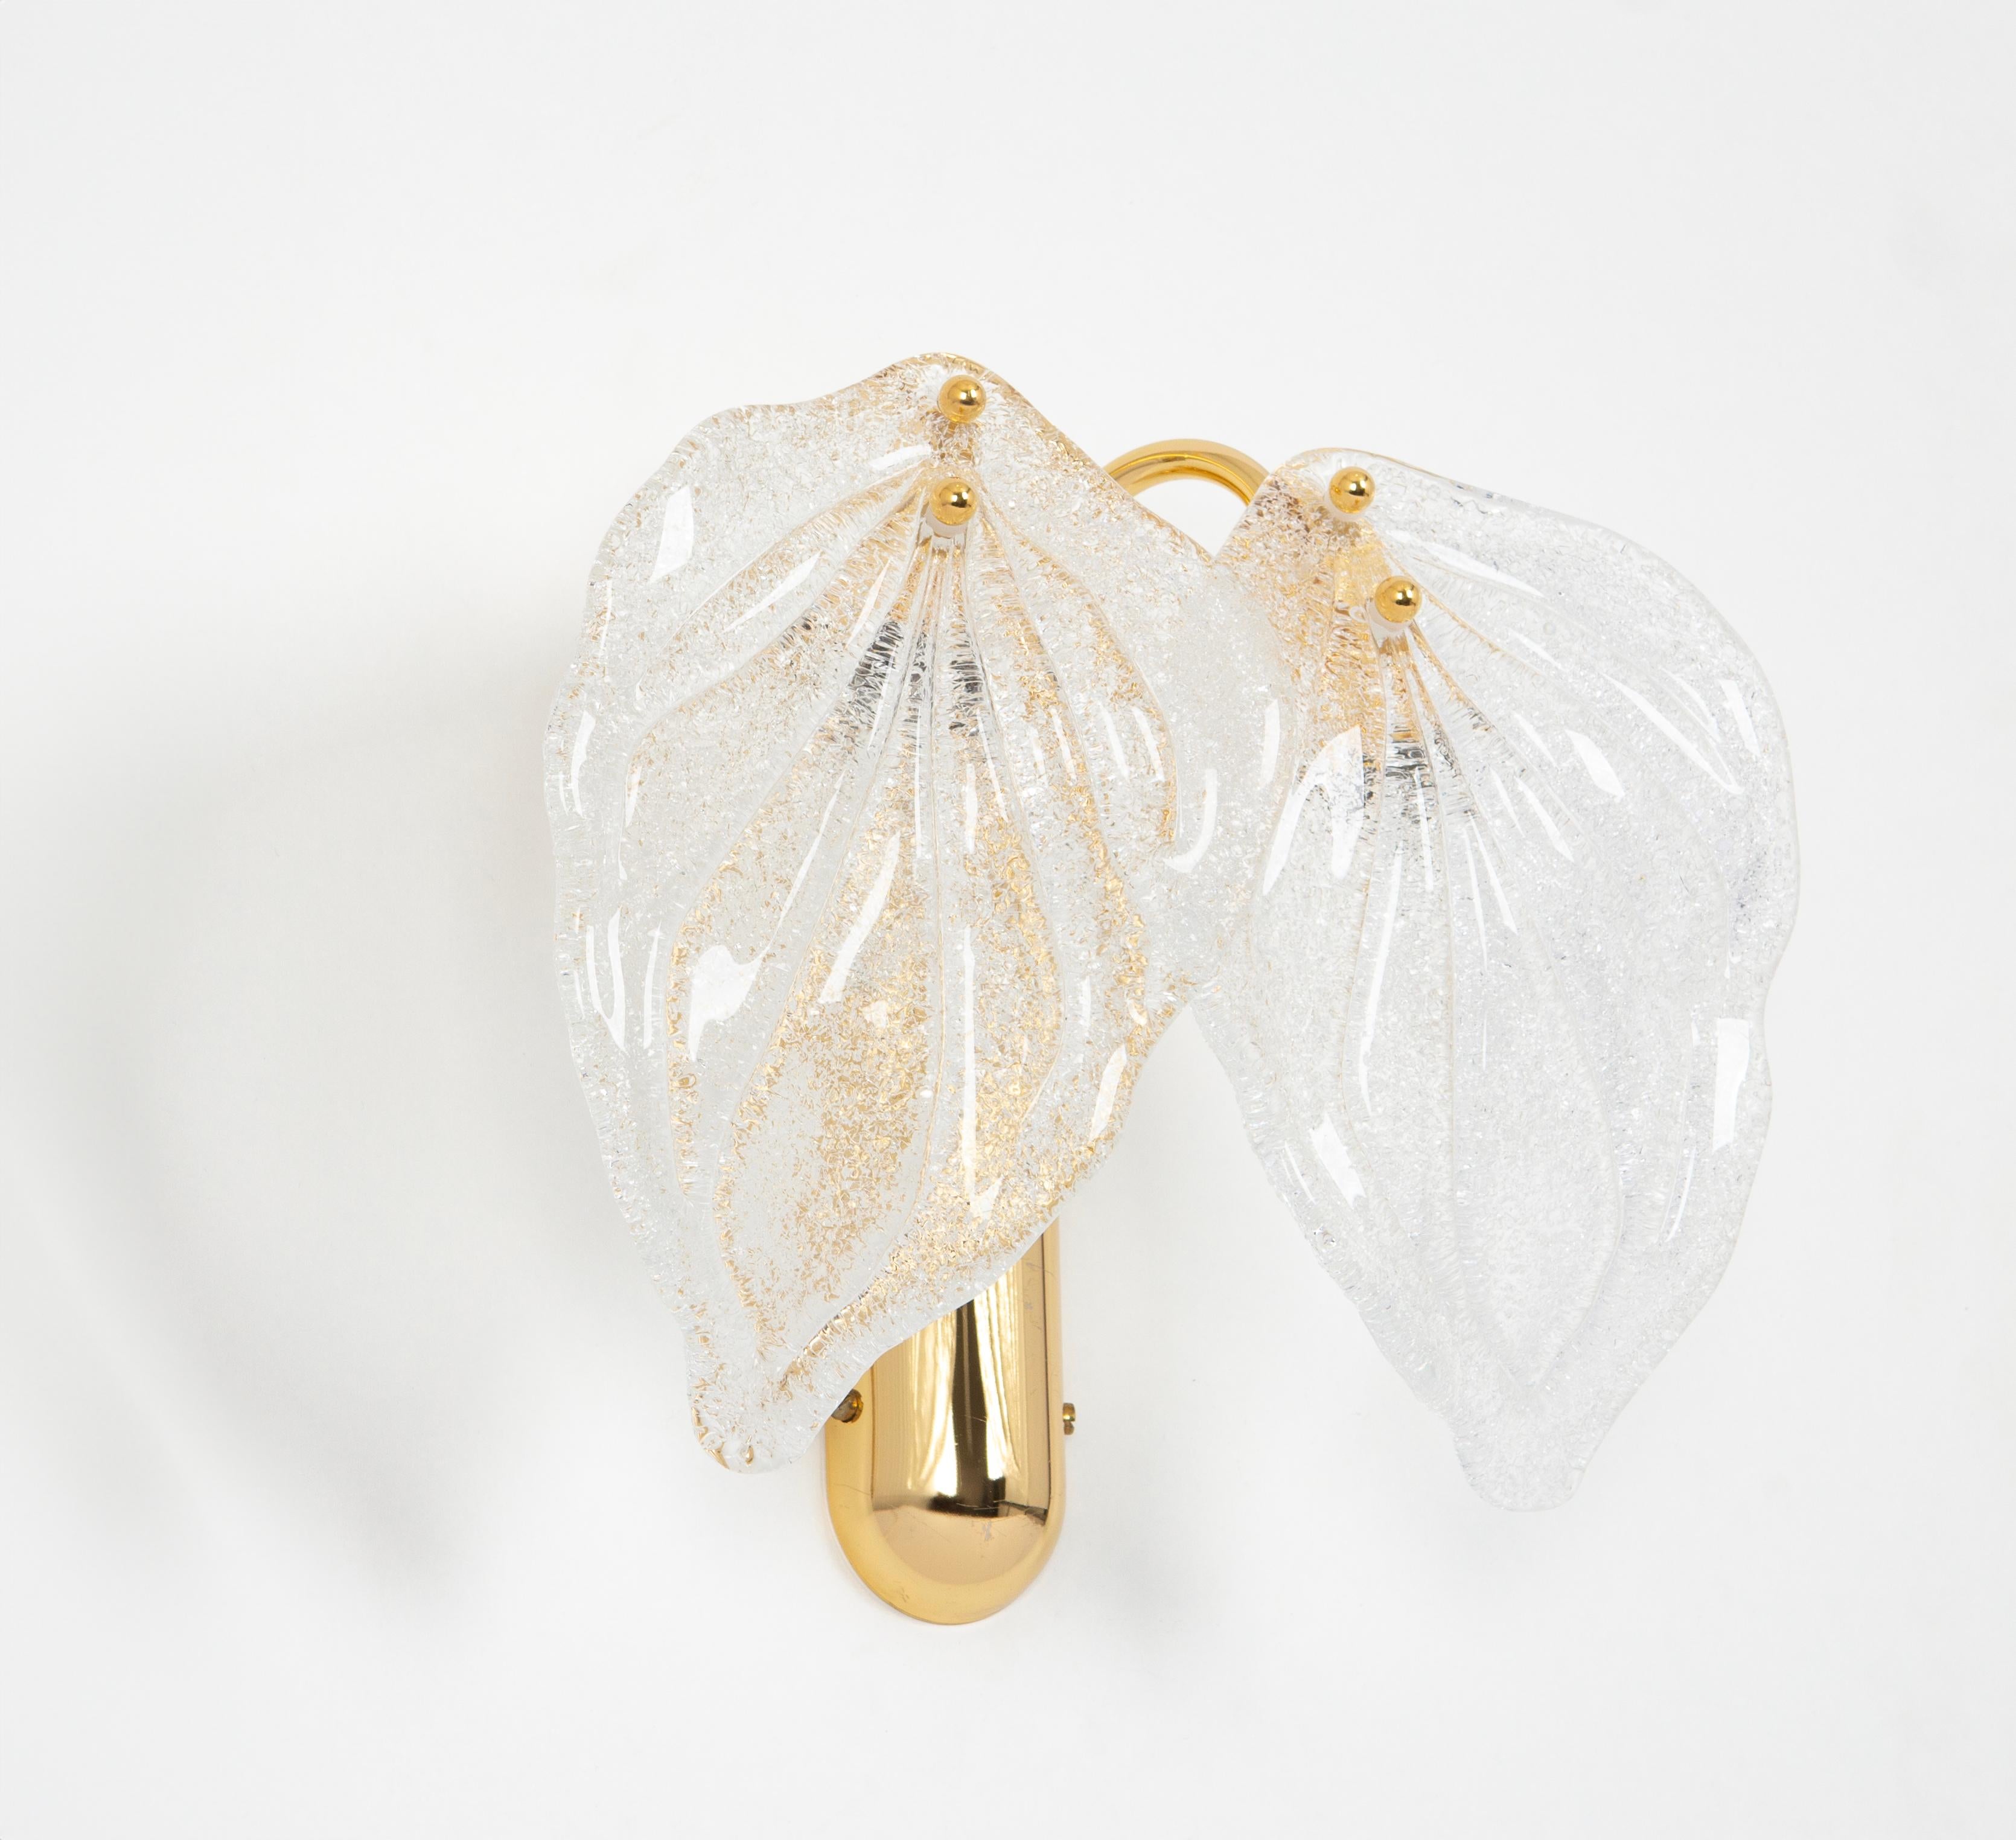 Gorgeous handblown glass leaf sconces from the manufactory Novaresi, Italy, each with two large leaves, 24-karat gold-plated frame.
High quality and in very good condition. Cleaned, well-wired and ready to use. 

The fixture requires 2 x E14